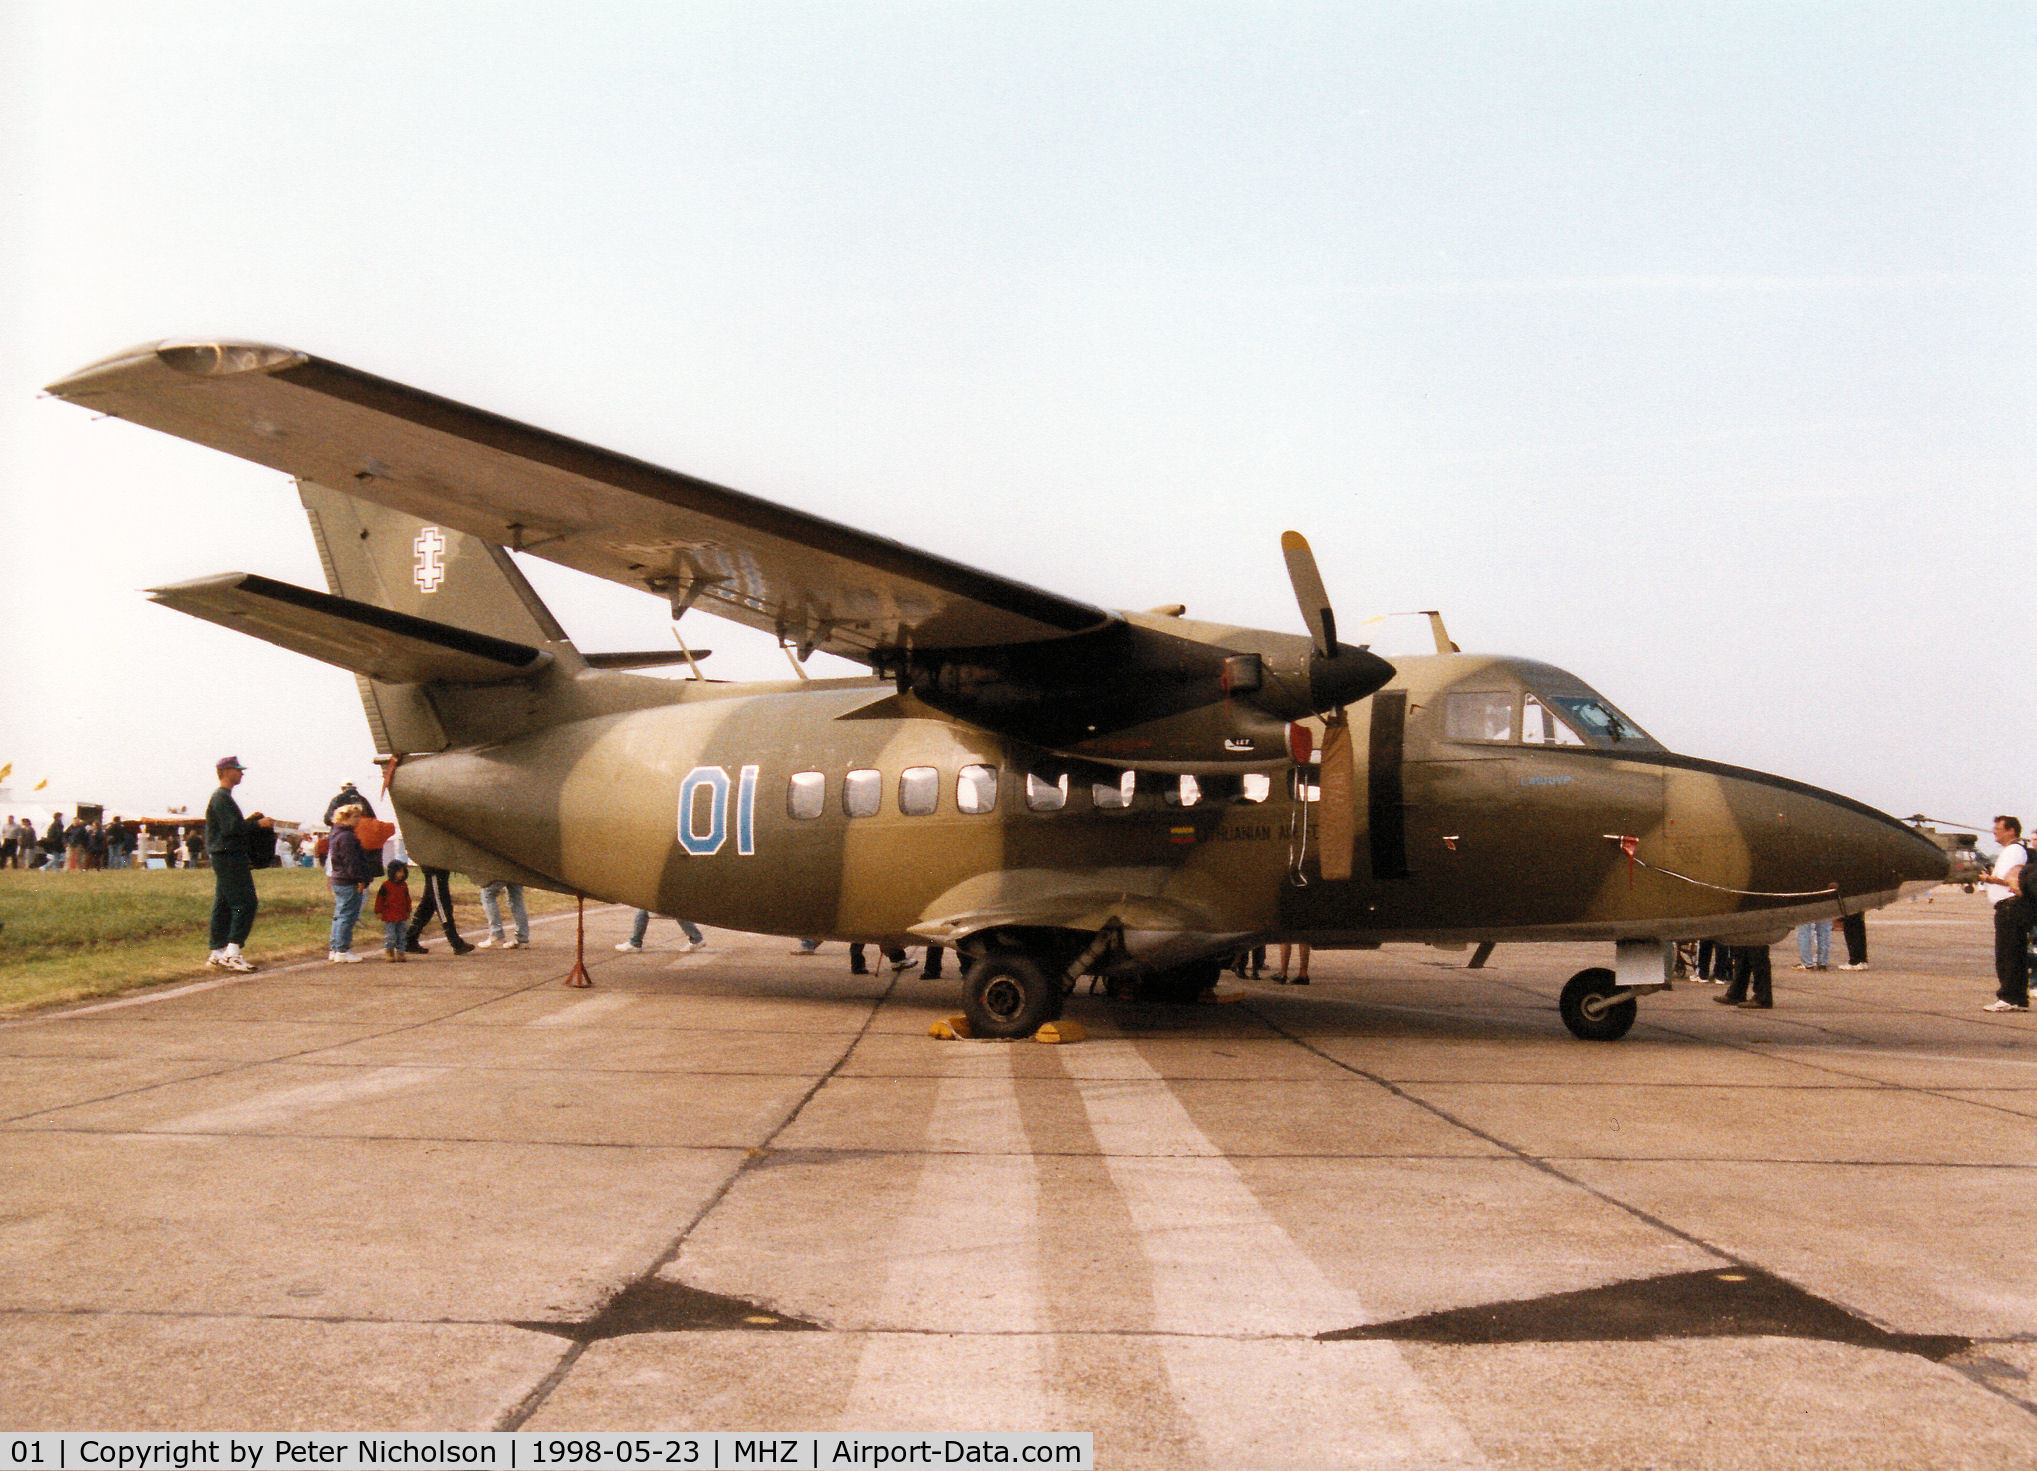 01, 1982 Let L-410UVP-T Turbolet C/N 820738, Turbolet of 12 Transports Eskradille of the Lithuanian Air Force based at Zokniai on display at the 1998 RAF Mildenhall Air Fete.